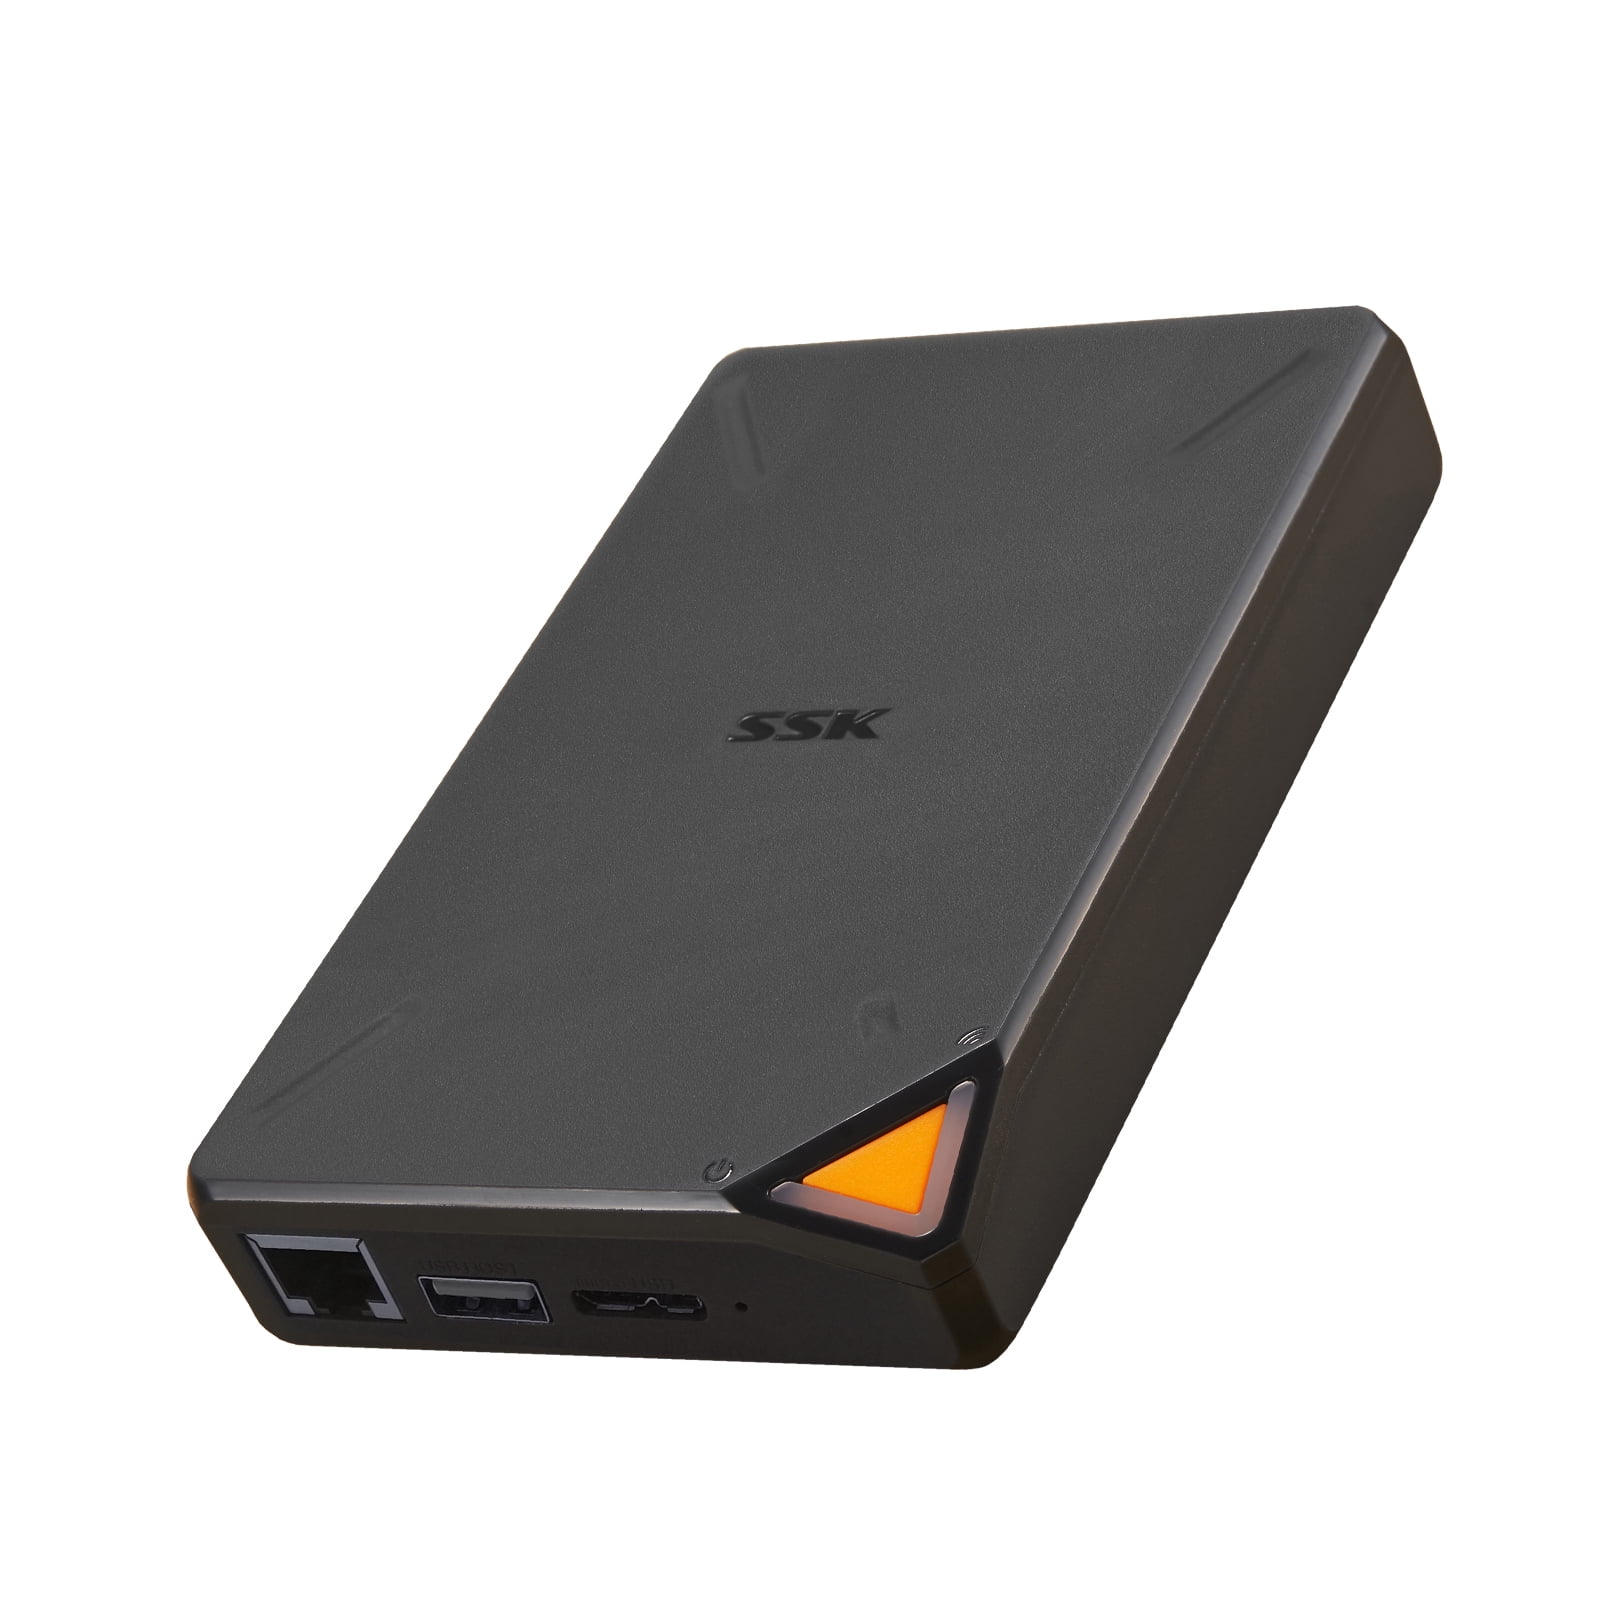 SSK 512G Portable External SSD,USB3.1 Gen2（6Gbps） Ultra Speed External Solid State Drive USB-C Mini External SSD with 550MB/s Data Transfer for Laptop Typc C Phones and More 